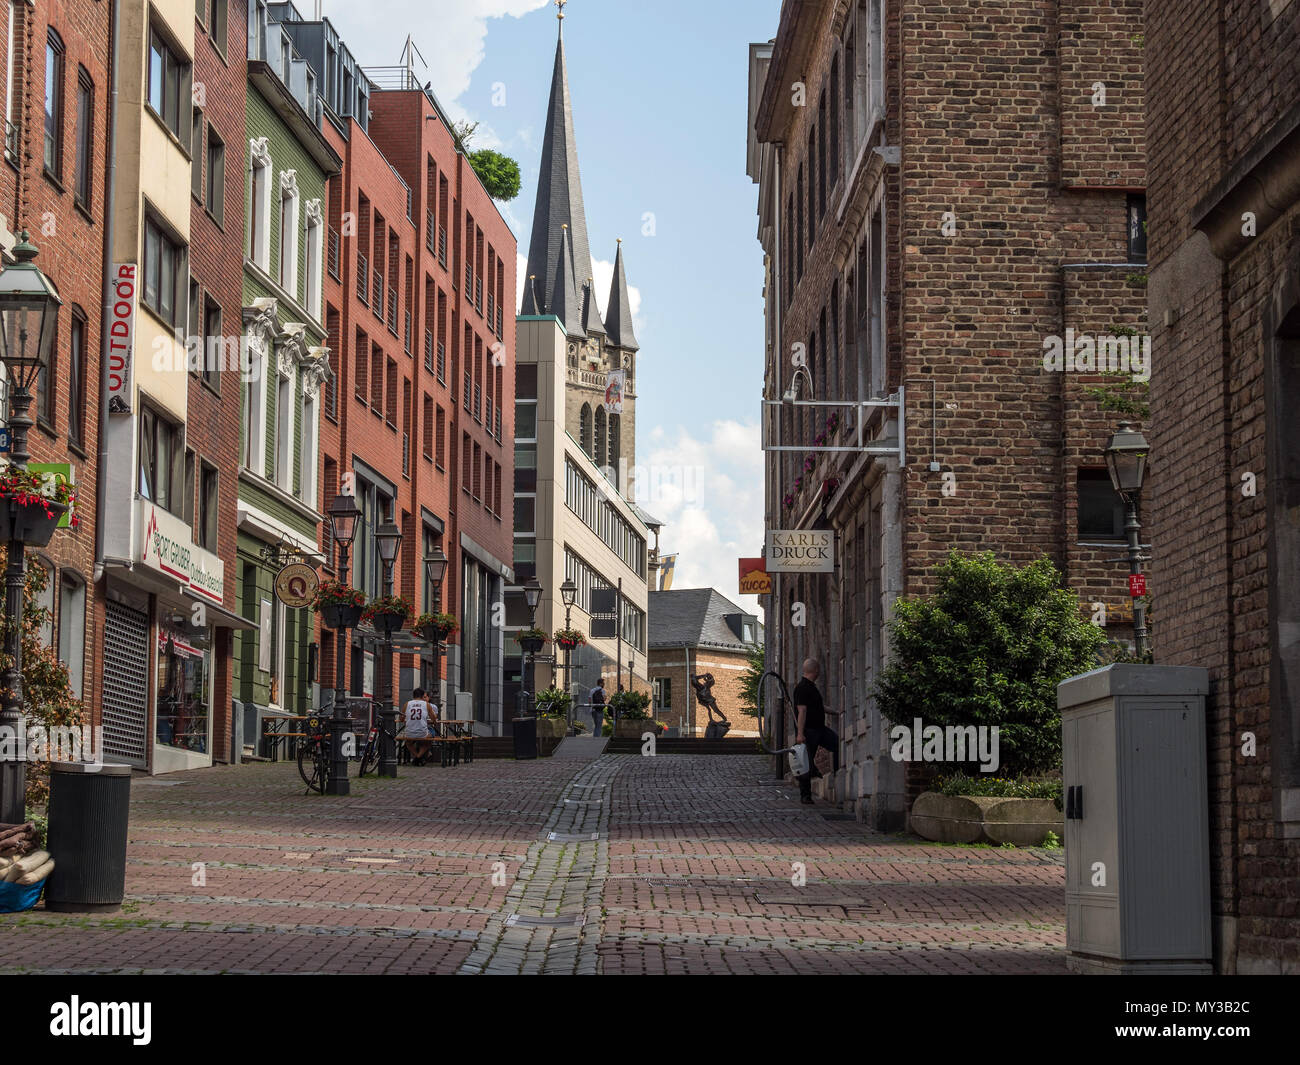 AACHEN, GERMANY - MAY 31, 2018. Street in the historical center of Aachen, the westernmost city in Germany, located near the borders with Belgium and  Stock Photo